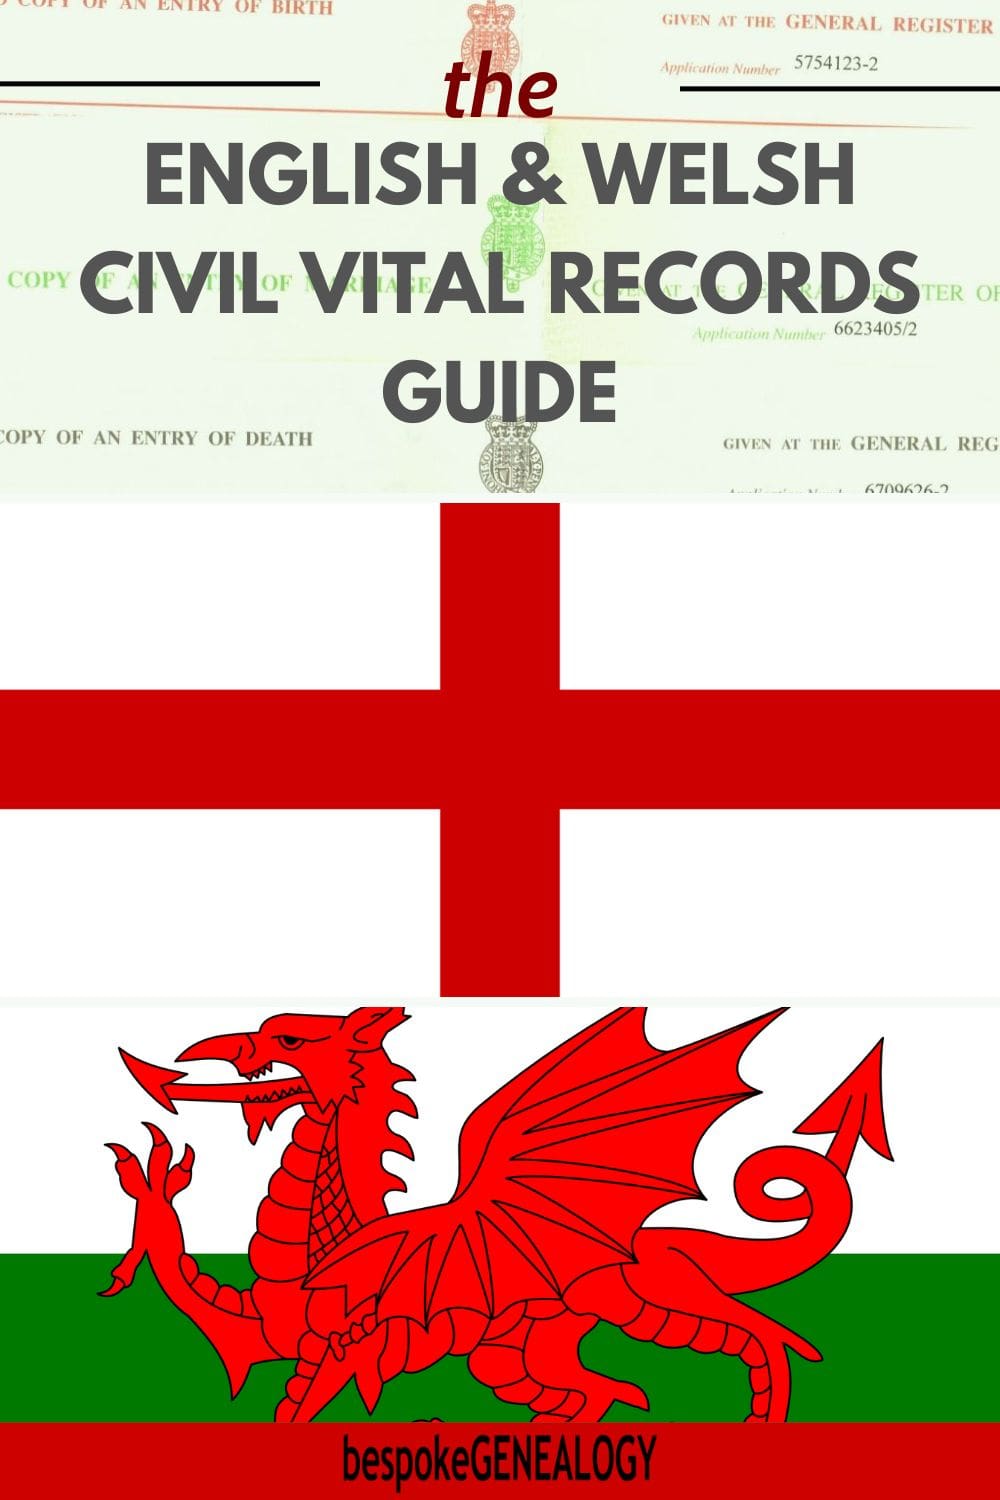 The English and Welsh Civil Vital Records Guide. Graphic of English and Welsh flags with part of some registration documents.